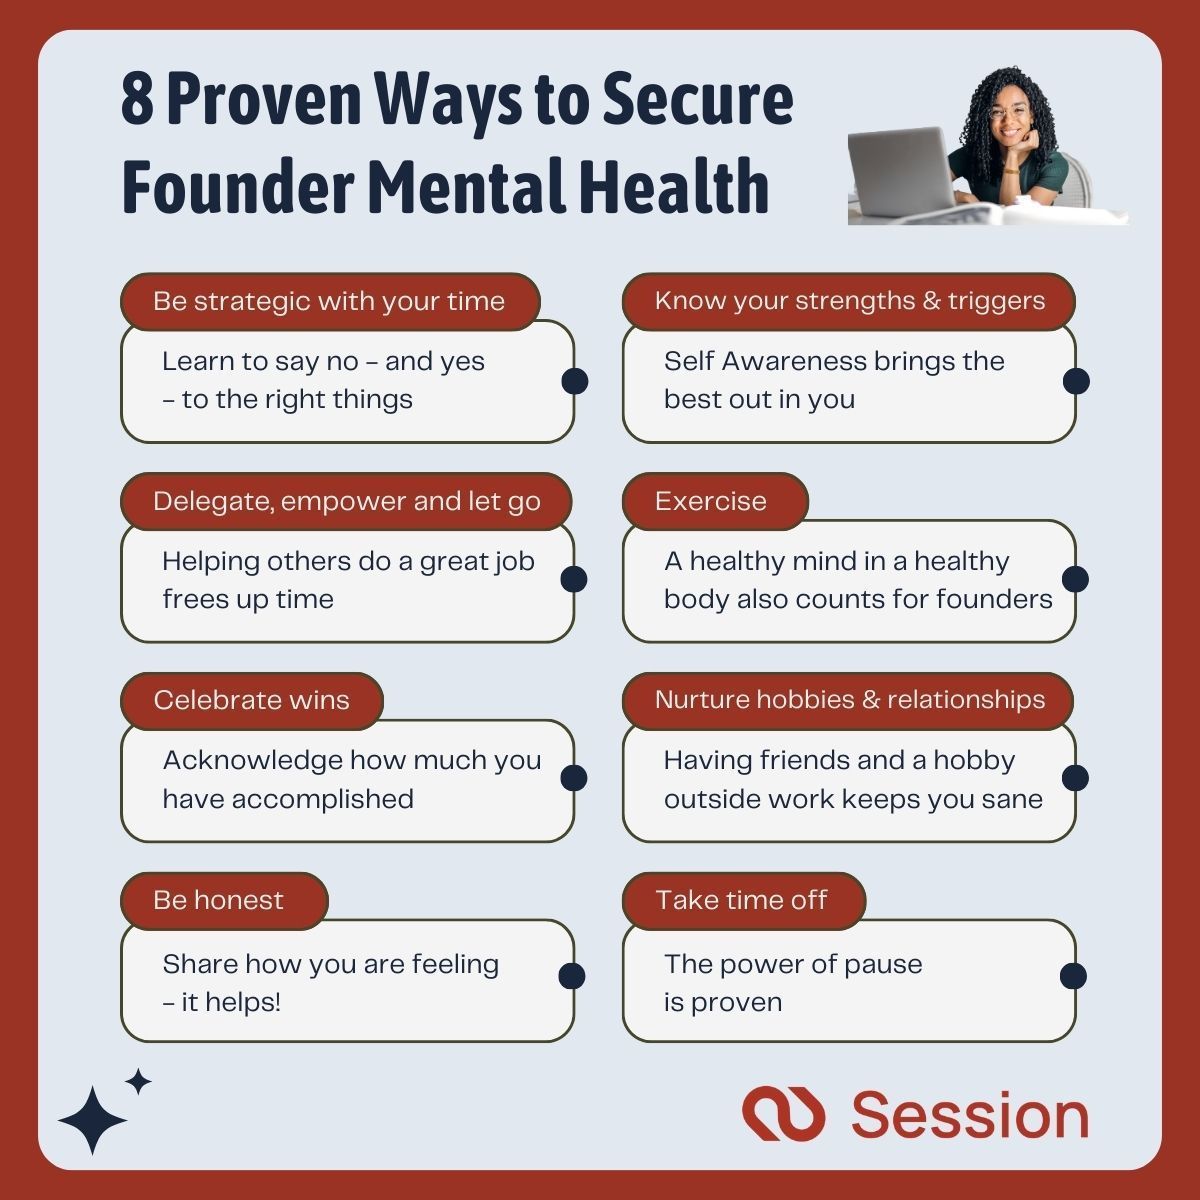 🚀 Founders, your mental health is key to startup success! Dive into our article for insights on nurturing well-being in the entrepreneurial journey. 

buff.ly/3X47Fy1

#FounderMentalHealth #StartupWellbeing #Entrepreneurship